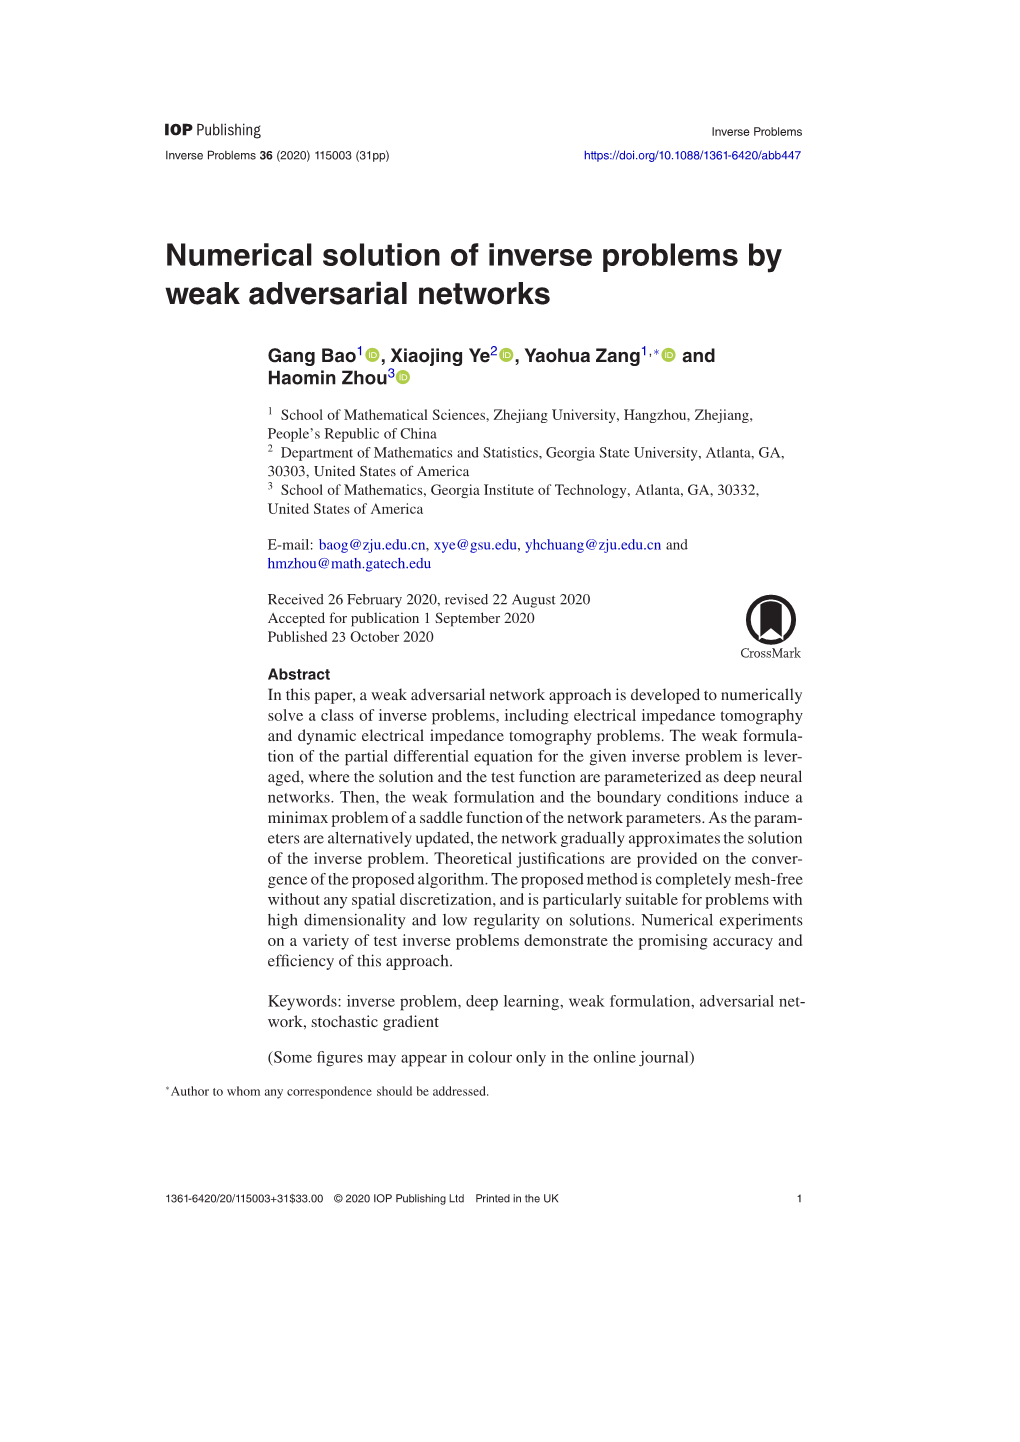 Numerical Solution of Inverse Problems by Weak Adversarial Networks